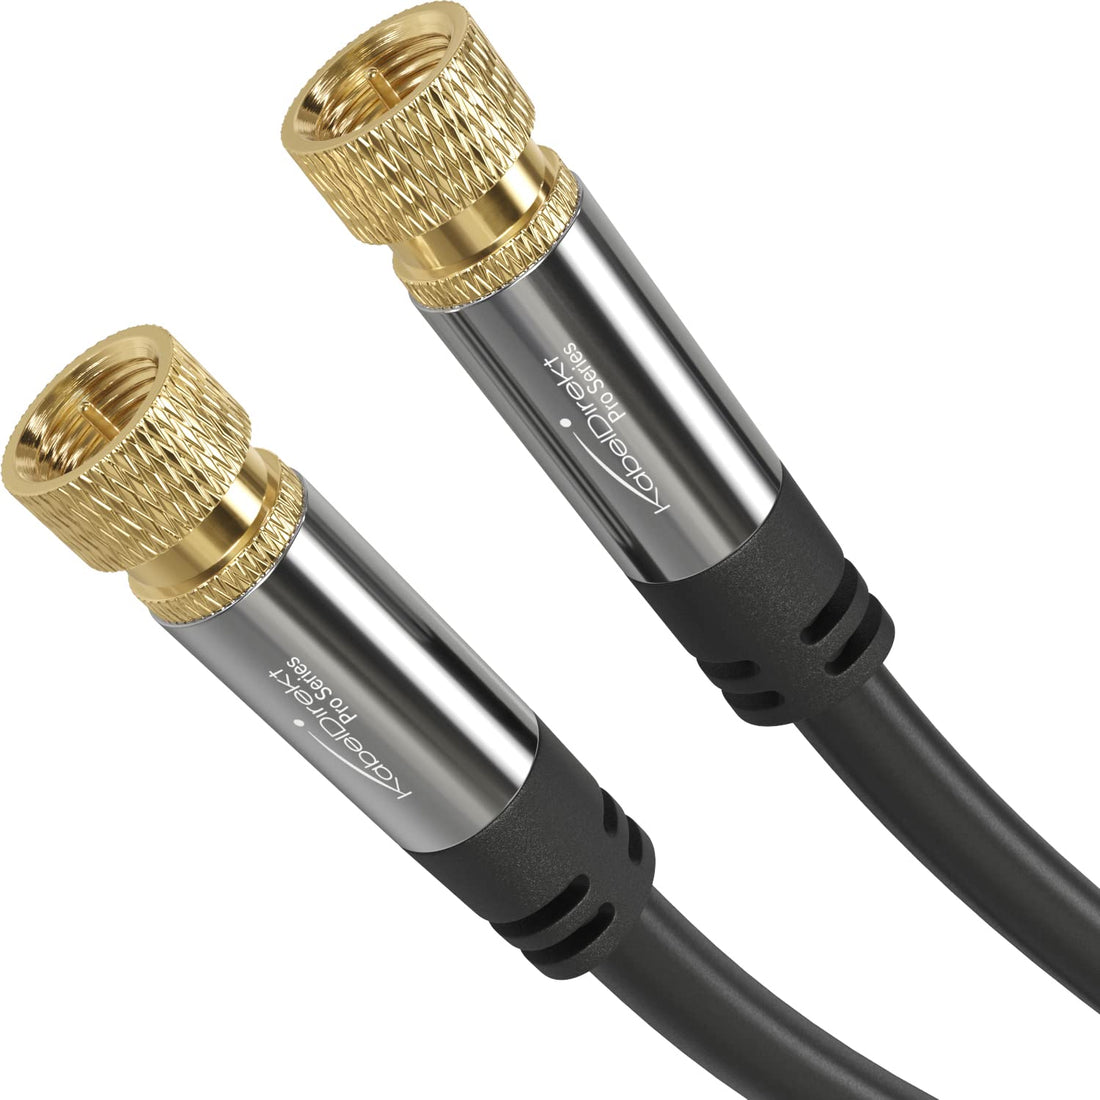 KabelDirekt Digital Coaxial Audio Video Cable (10ft) Satellite Cable Connectors - Coax Male F Connector Pin - Coax Cables for Satellite Television - PRO Series